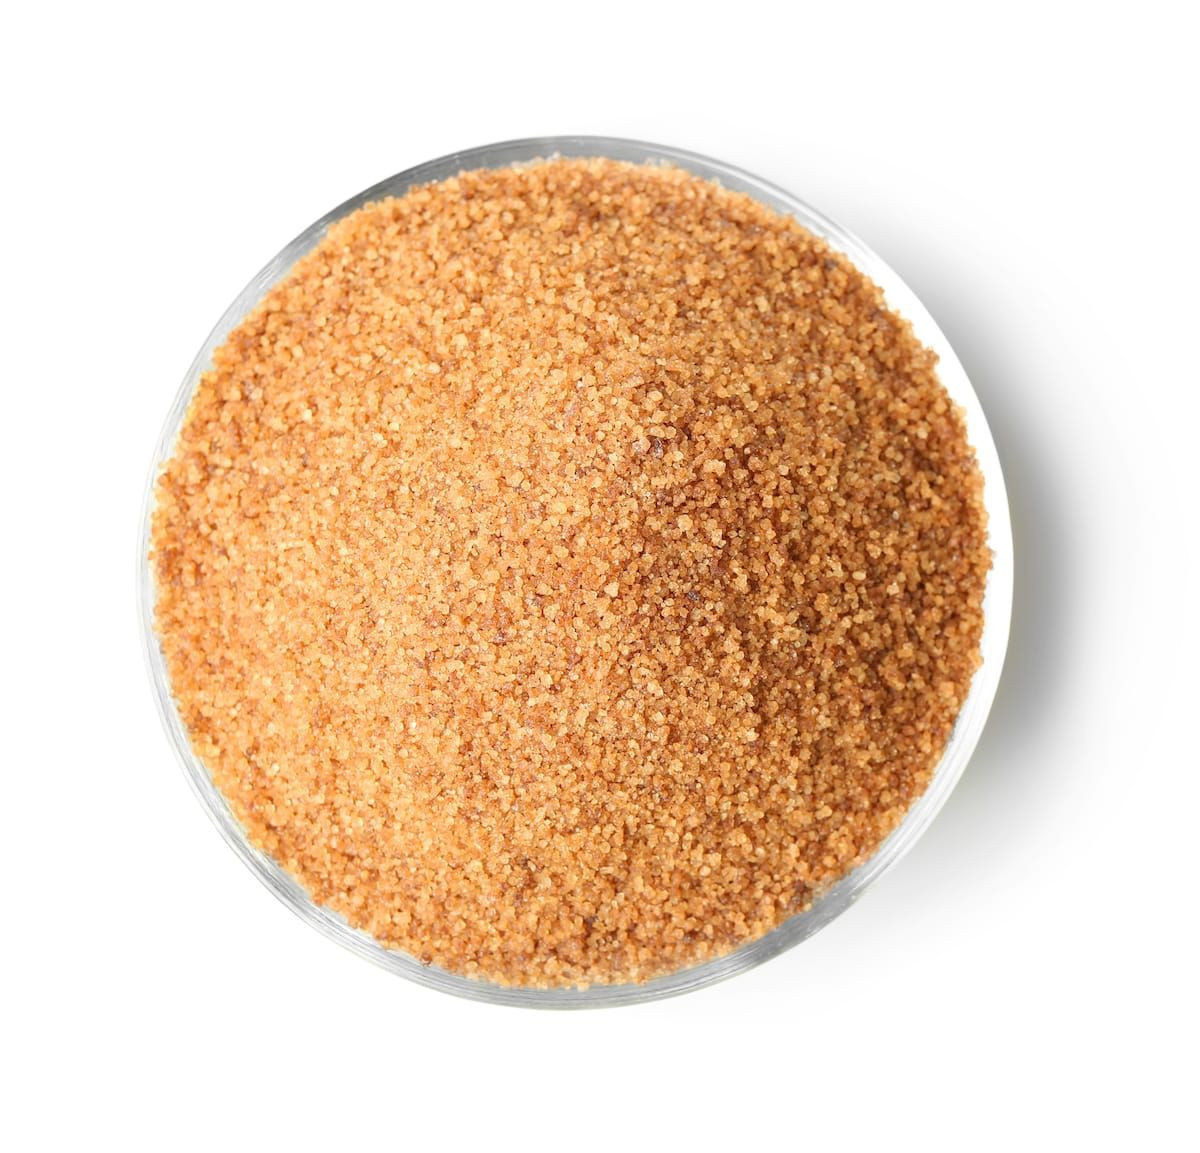 Good quality brown sugar for healthy life